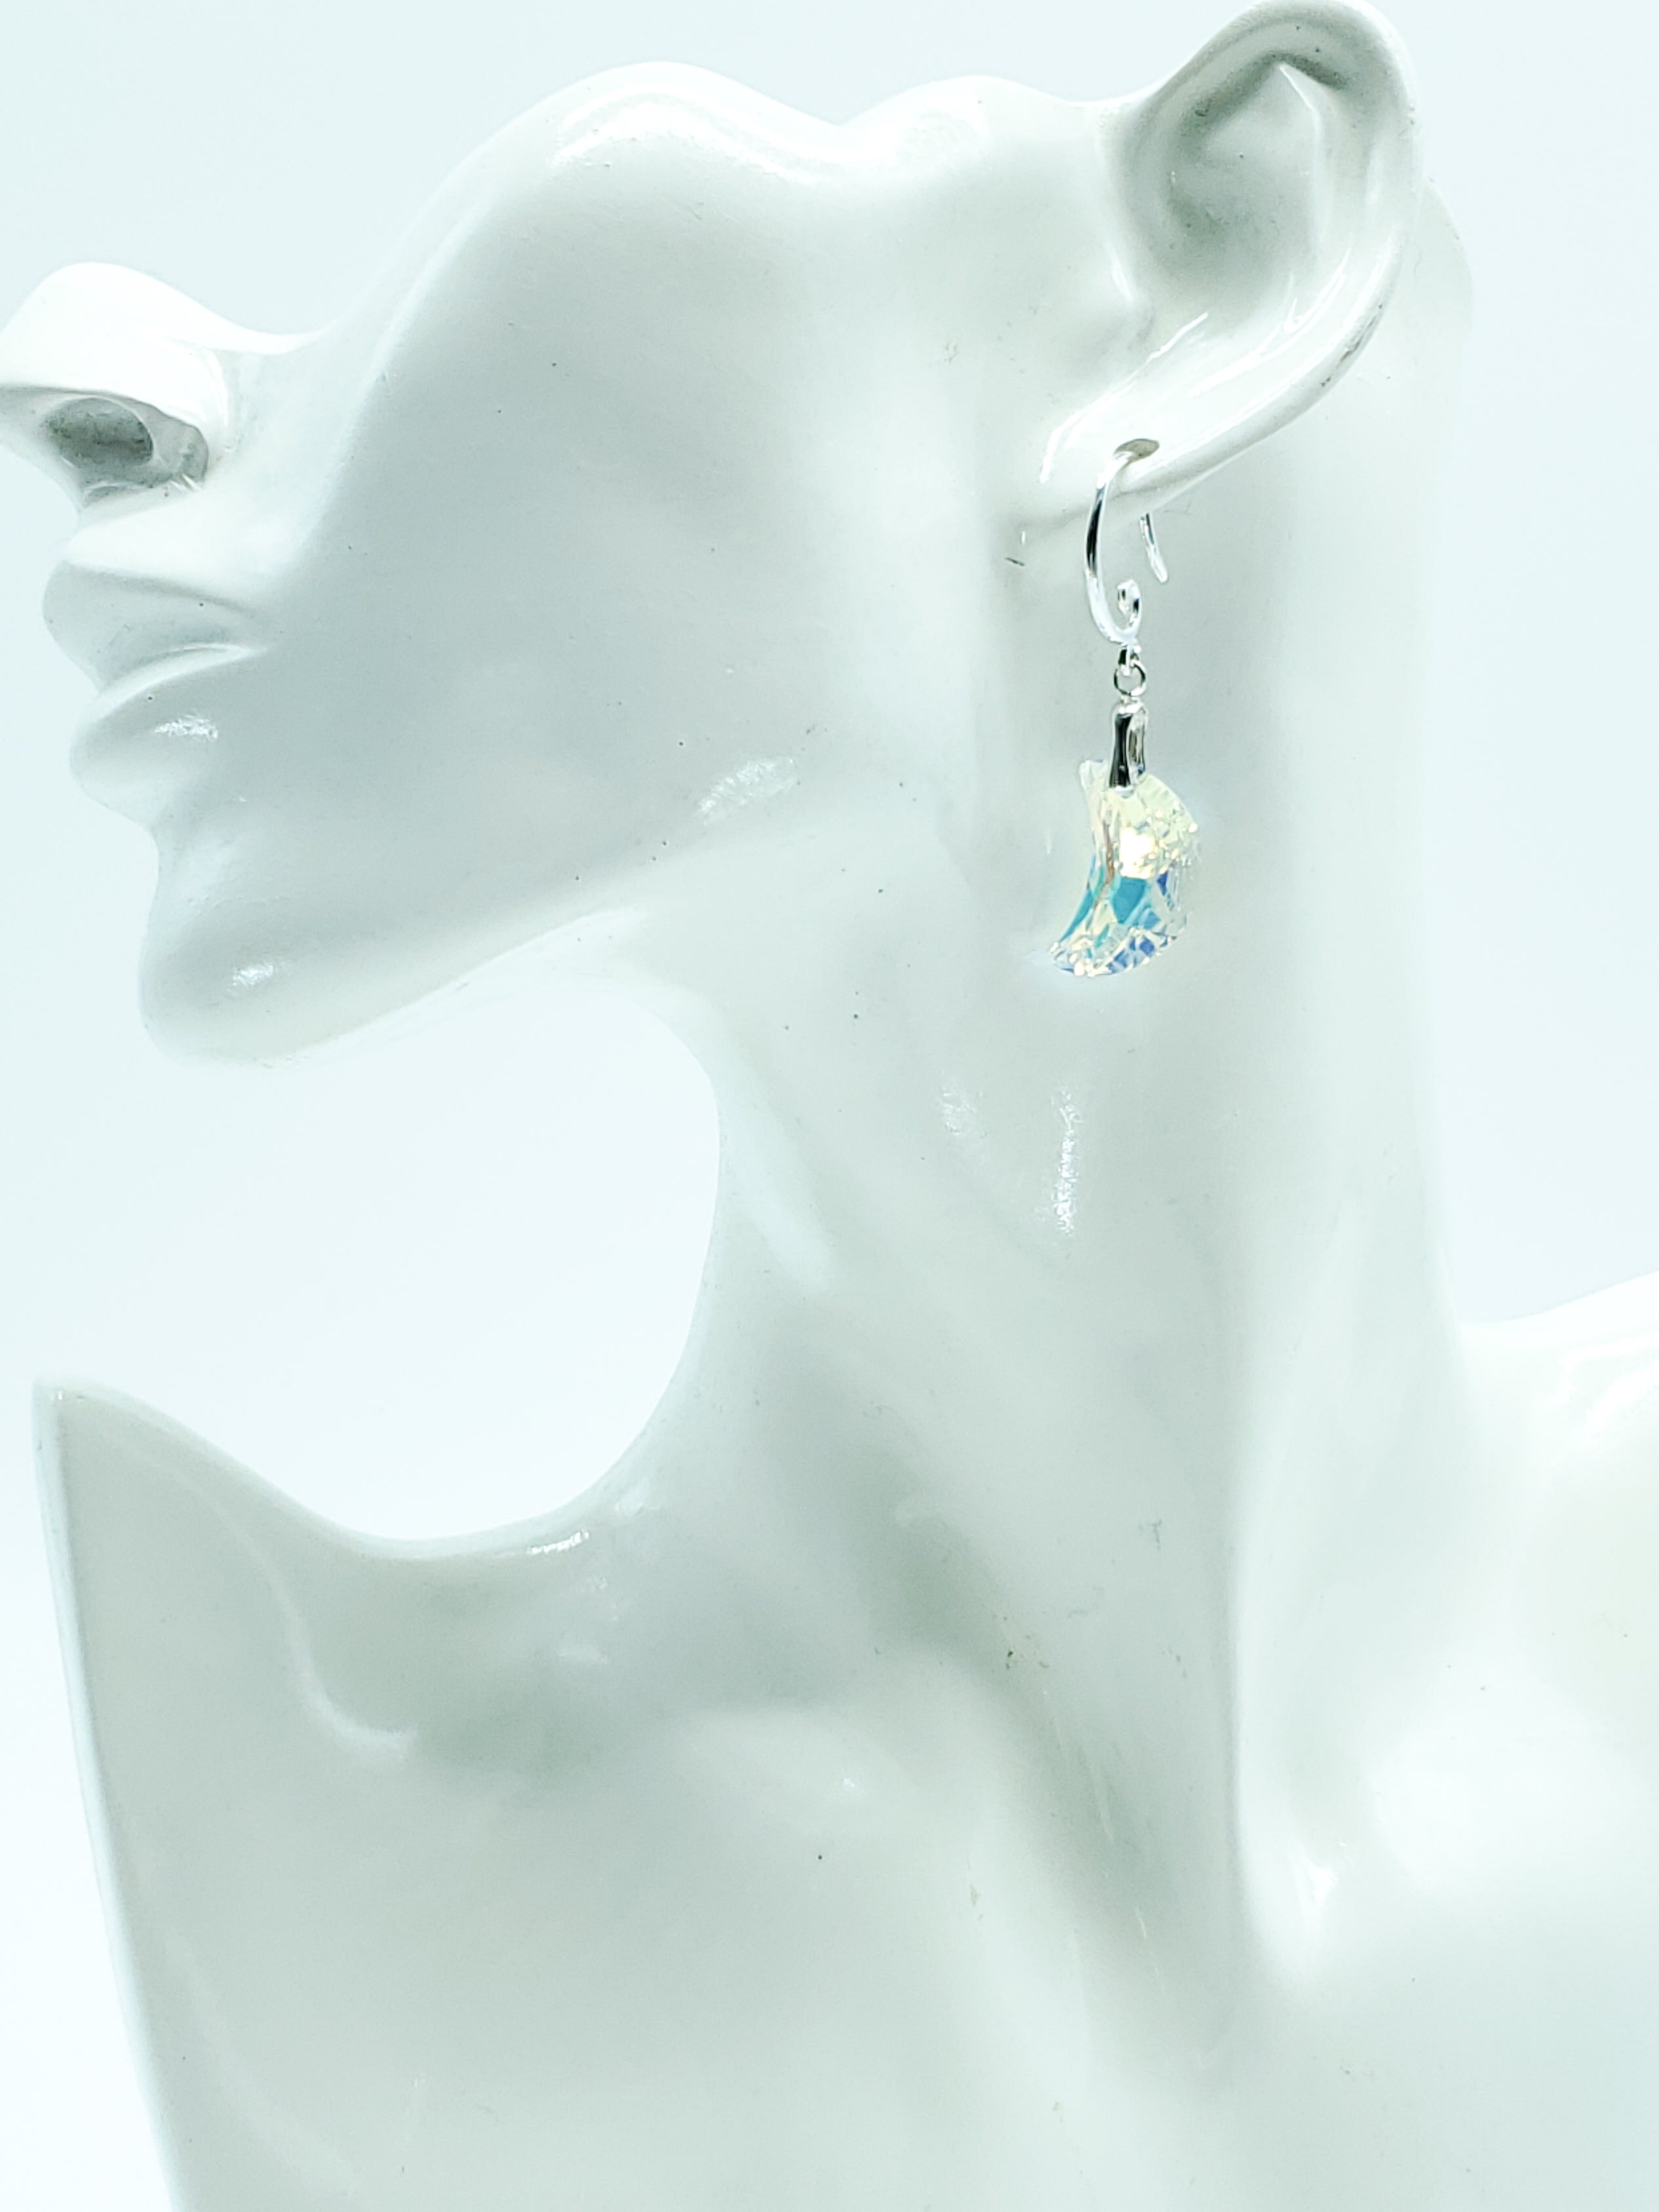 "Crystal Aurore Boreale" Swarovski Crystal Moon Earrings on Sterling Silver - The Caffeinated Raven